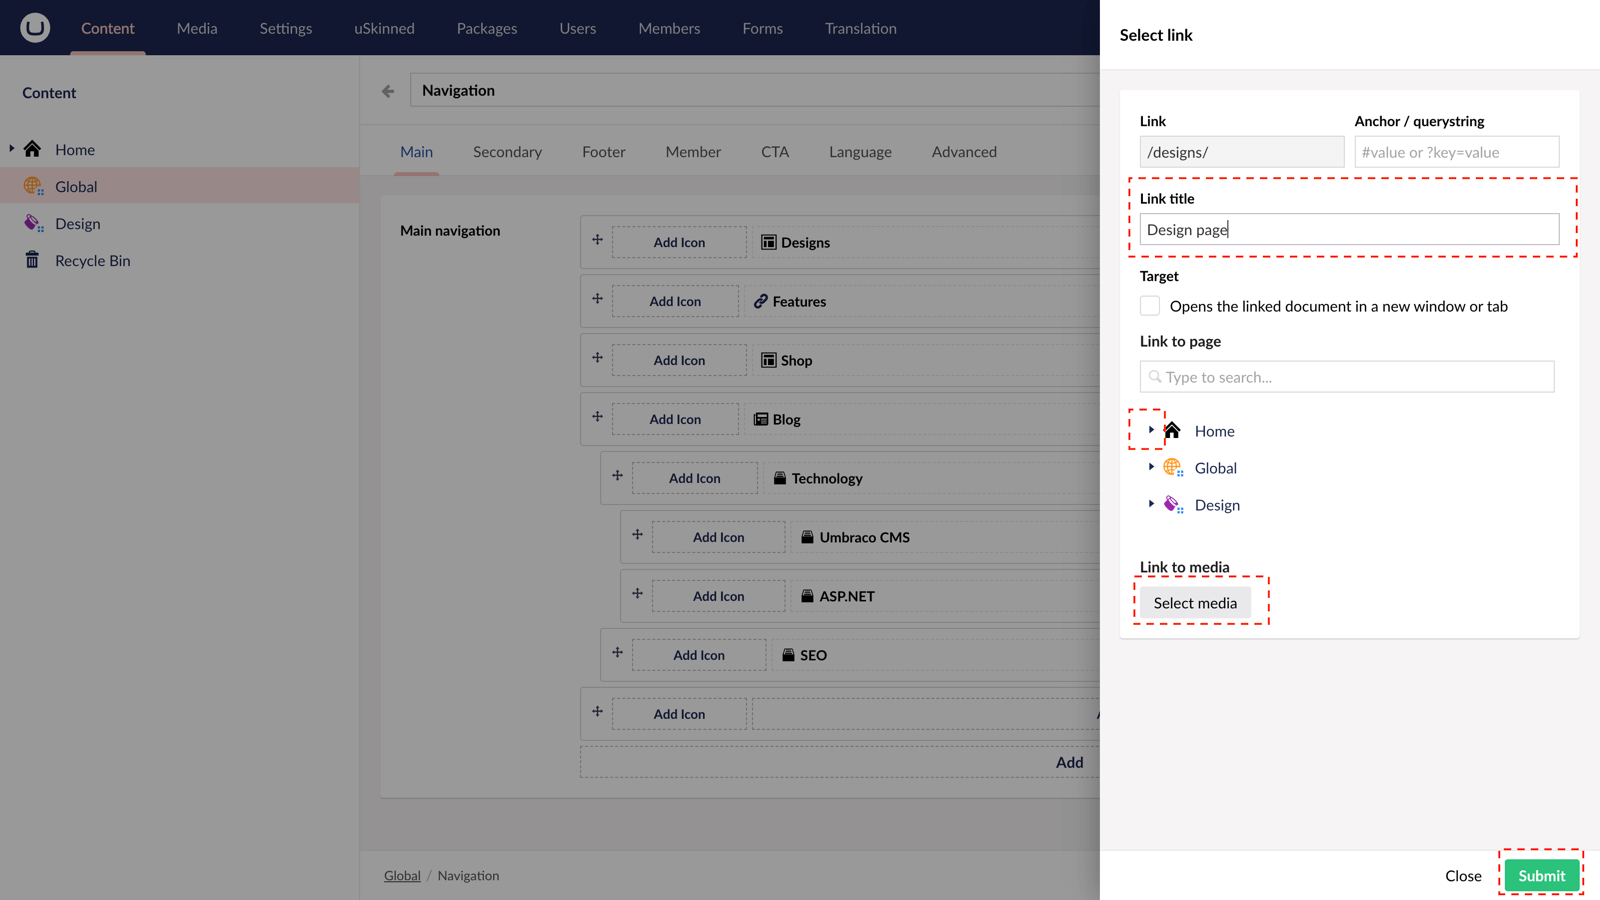 Edit links on your navigation in uSkinned for Umbraco.